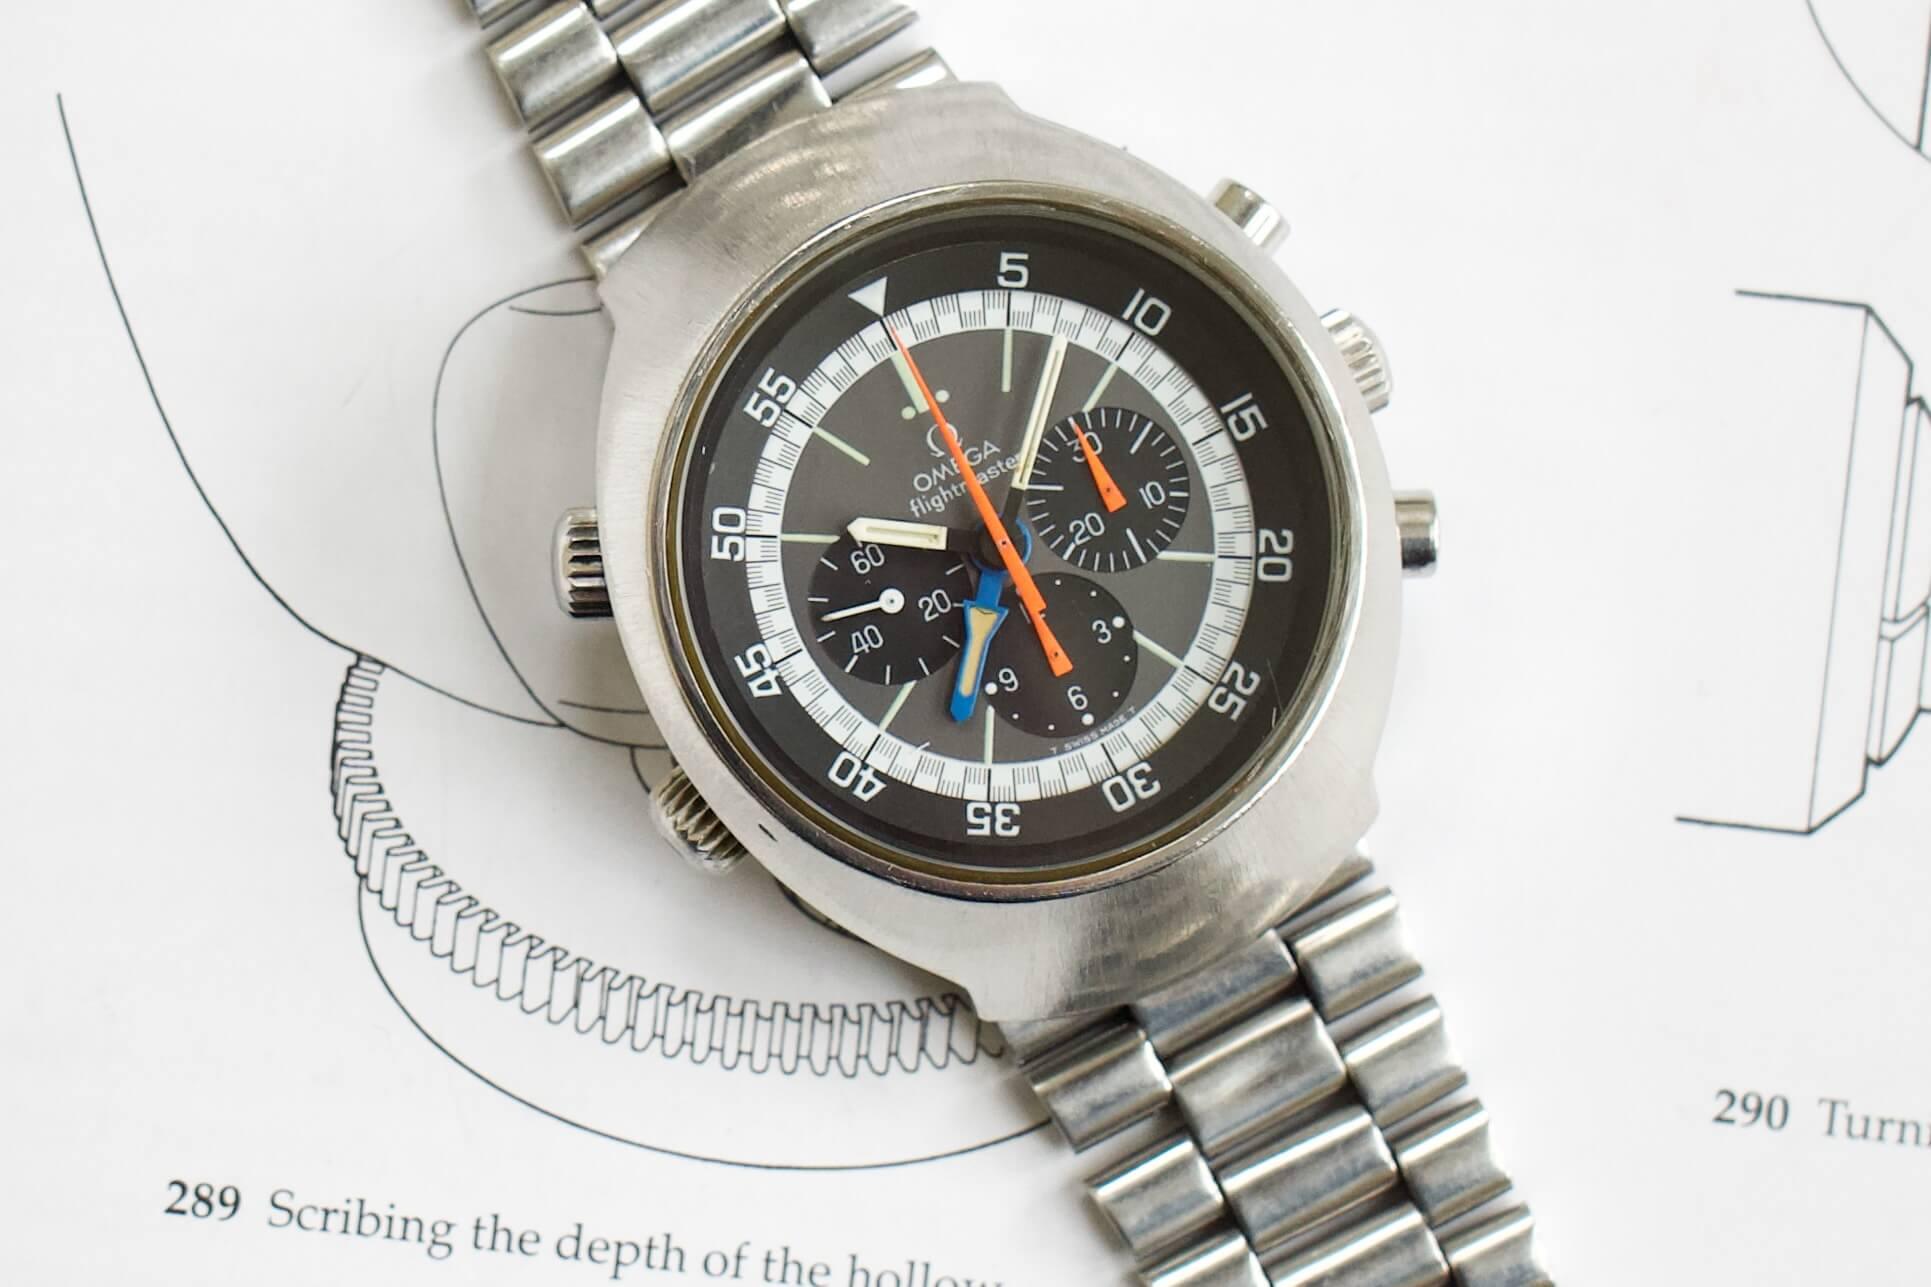 Vintage Watches & Cars - Watches | Breitling - 1970s Ref. 817 Cp1  Chronograph, Italian Army Issued